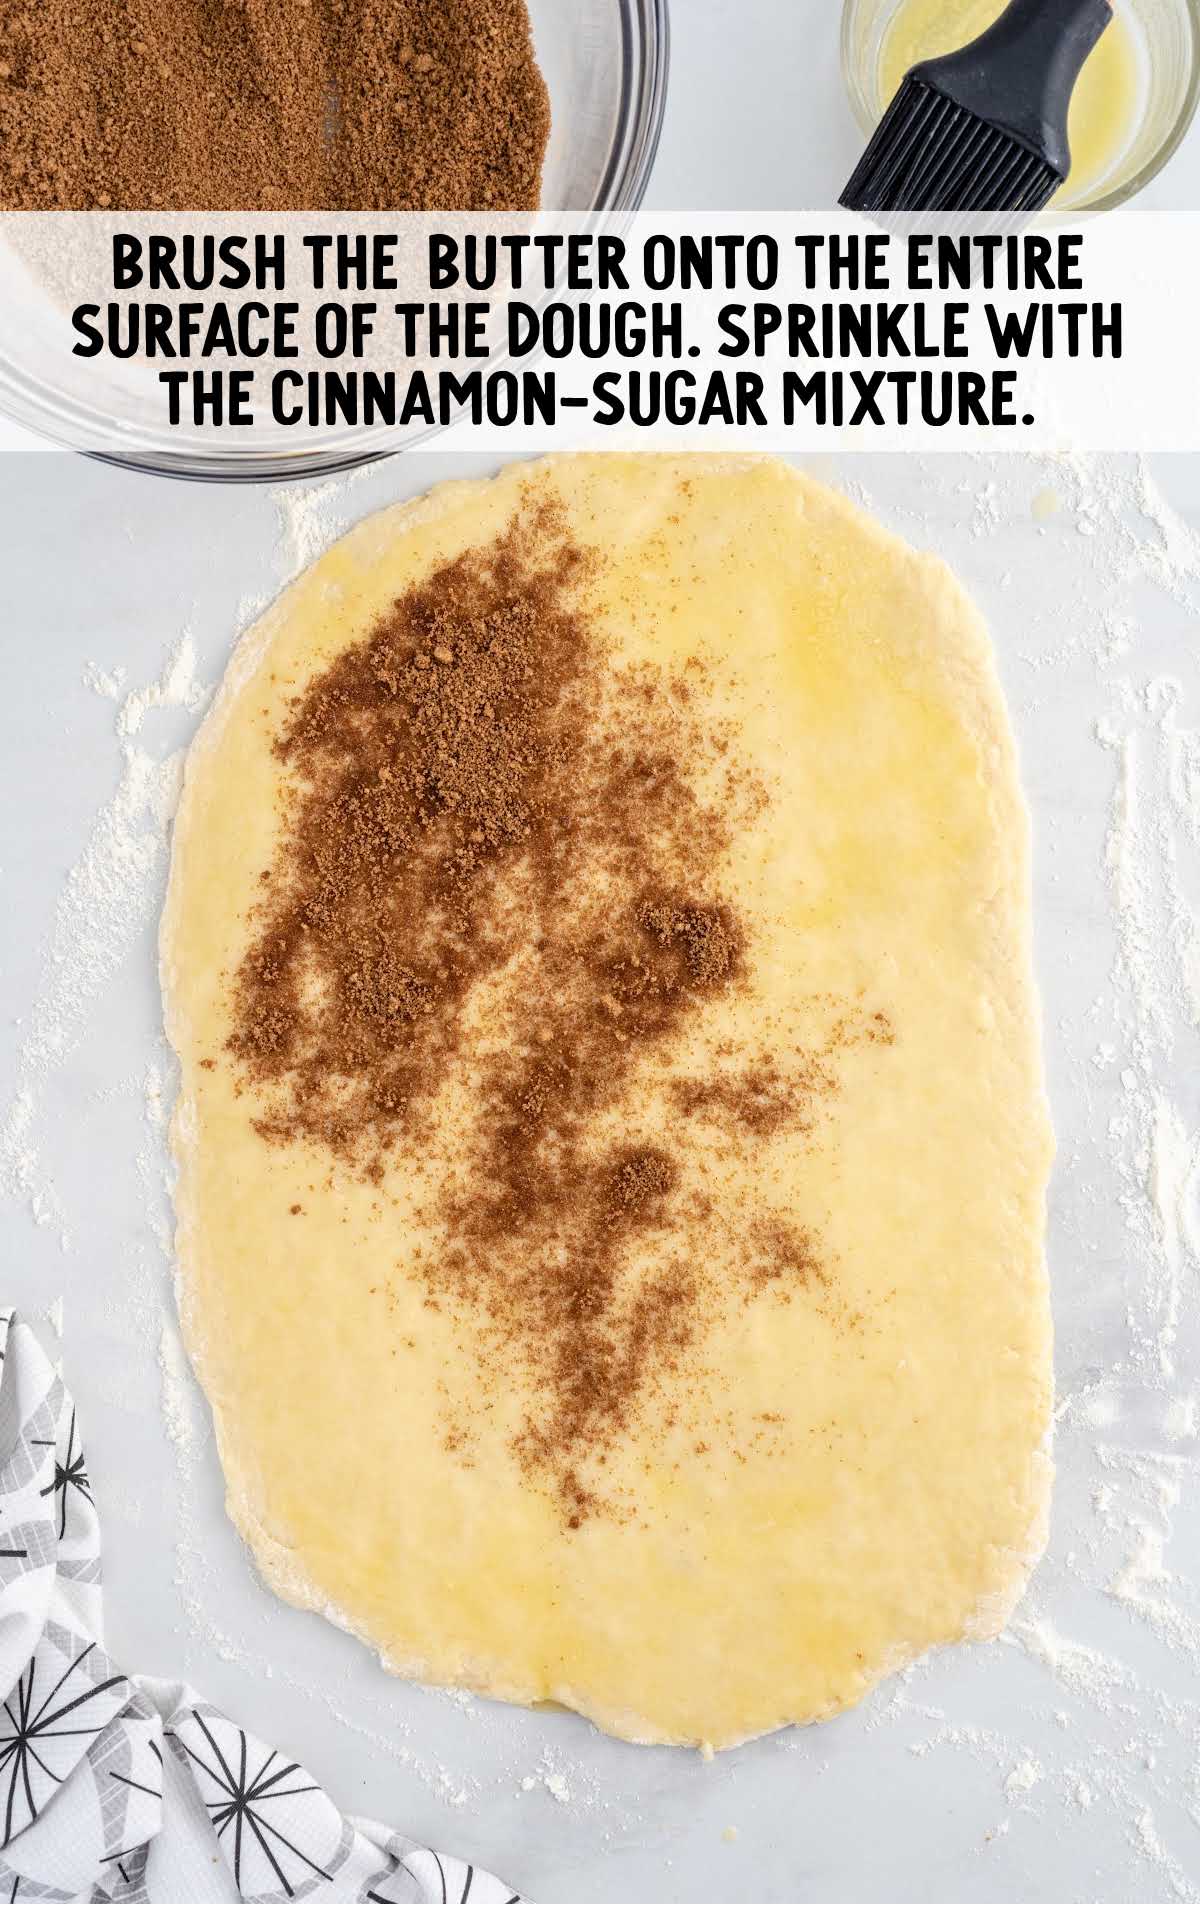 cinnamon-sugar mixture placed on top of the dough